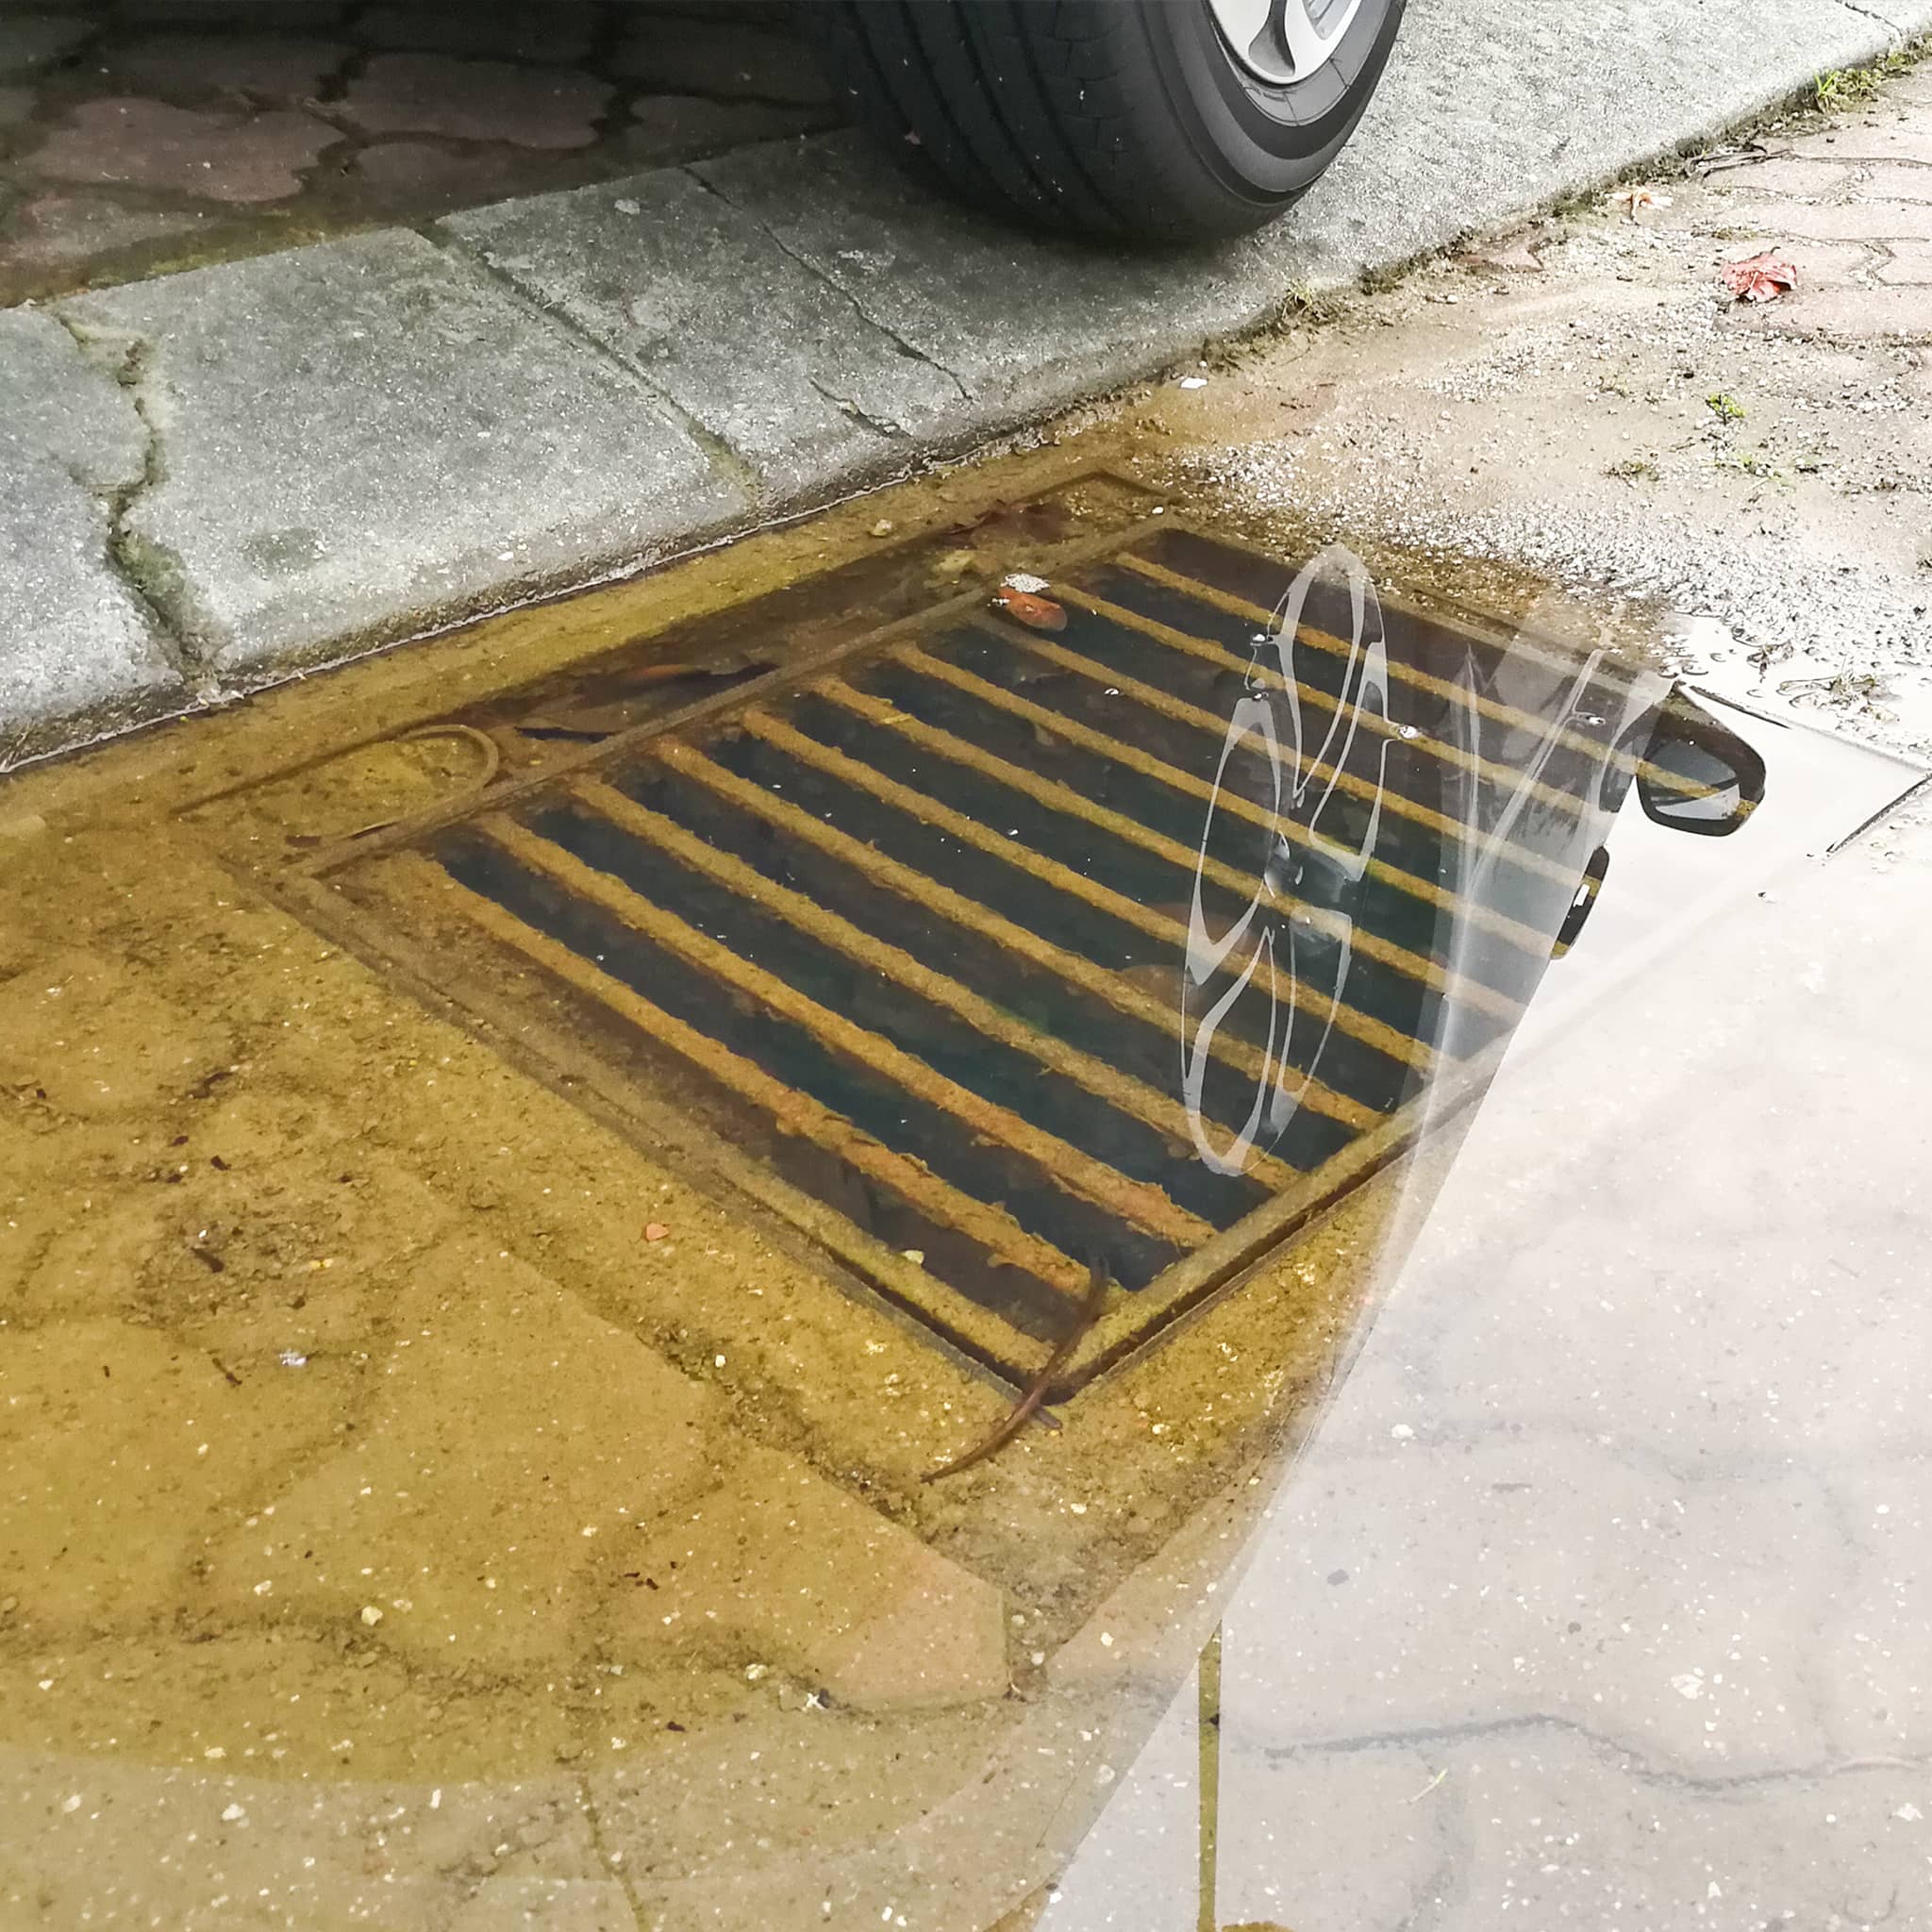 Leaking manhole with visible water escape, indicating underground infrastructure issues